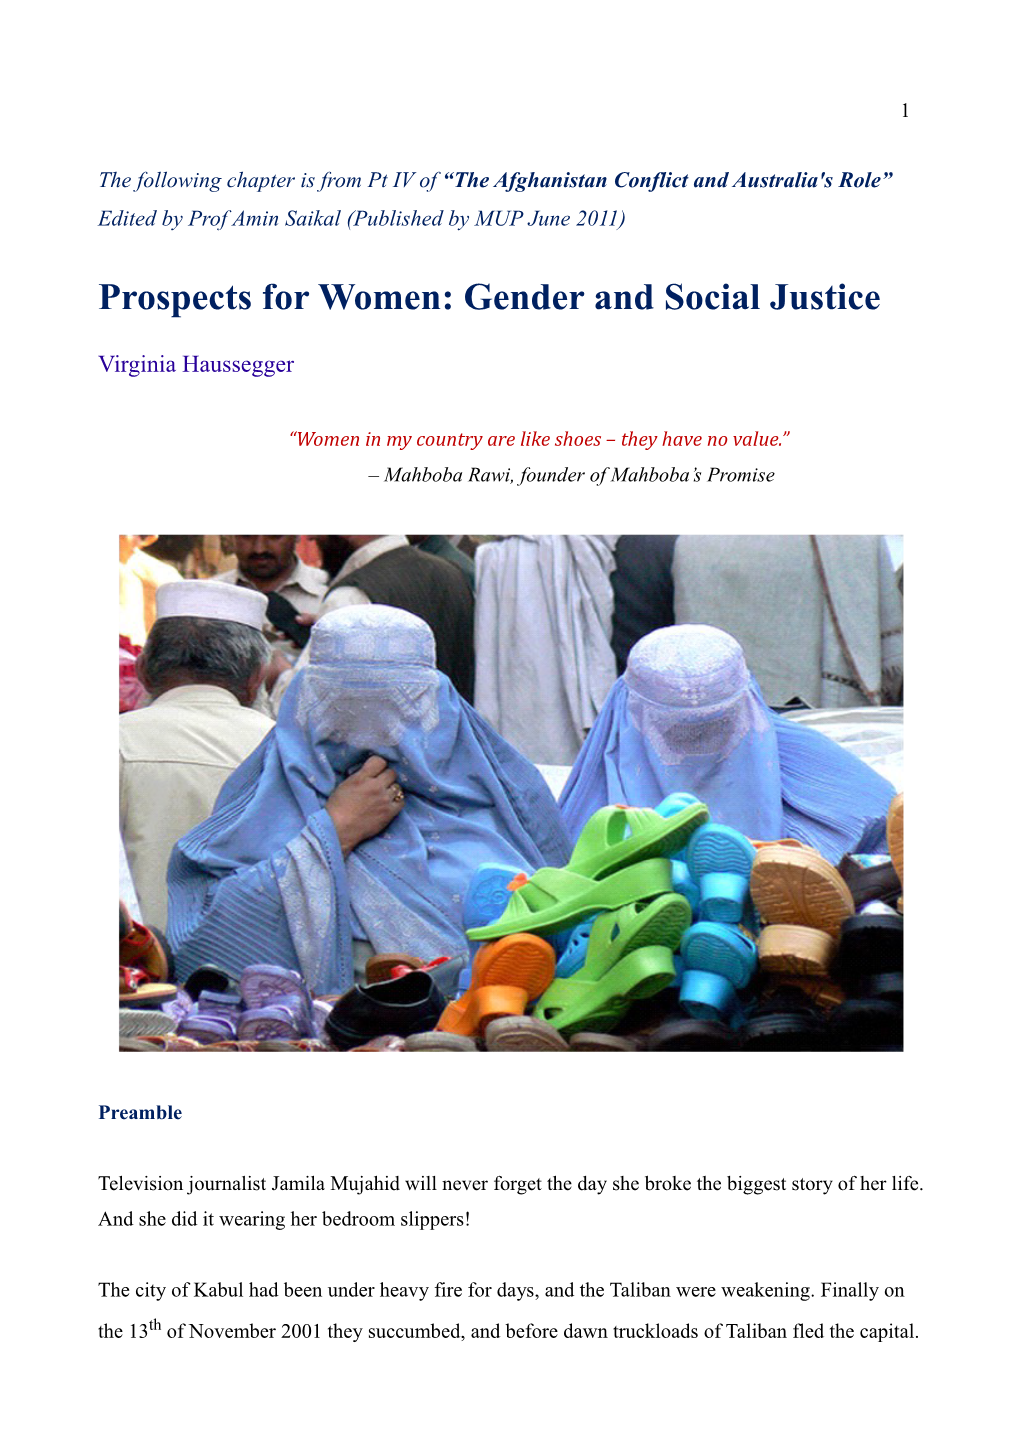 Prospects for Women: Gender and Social Justice